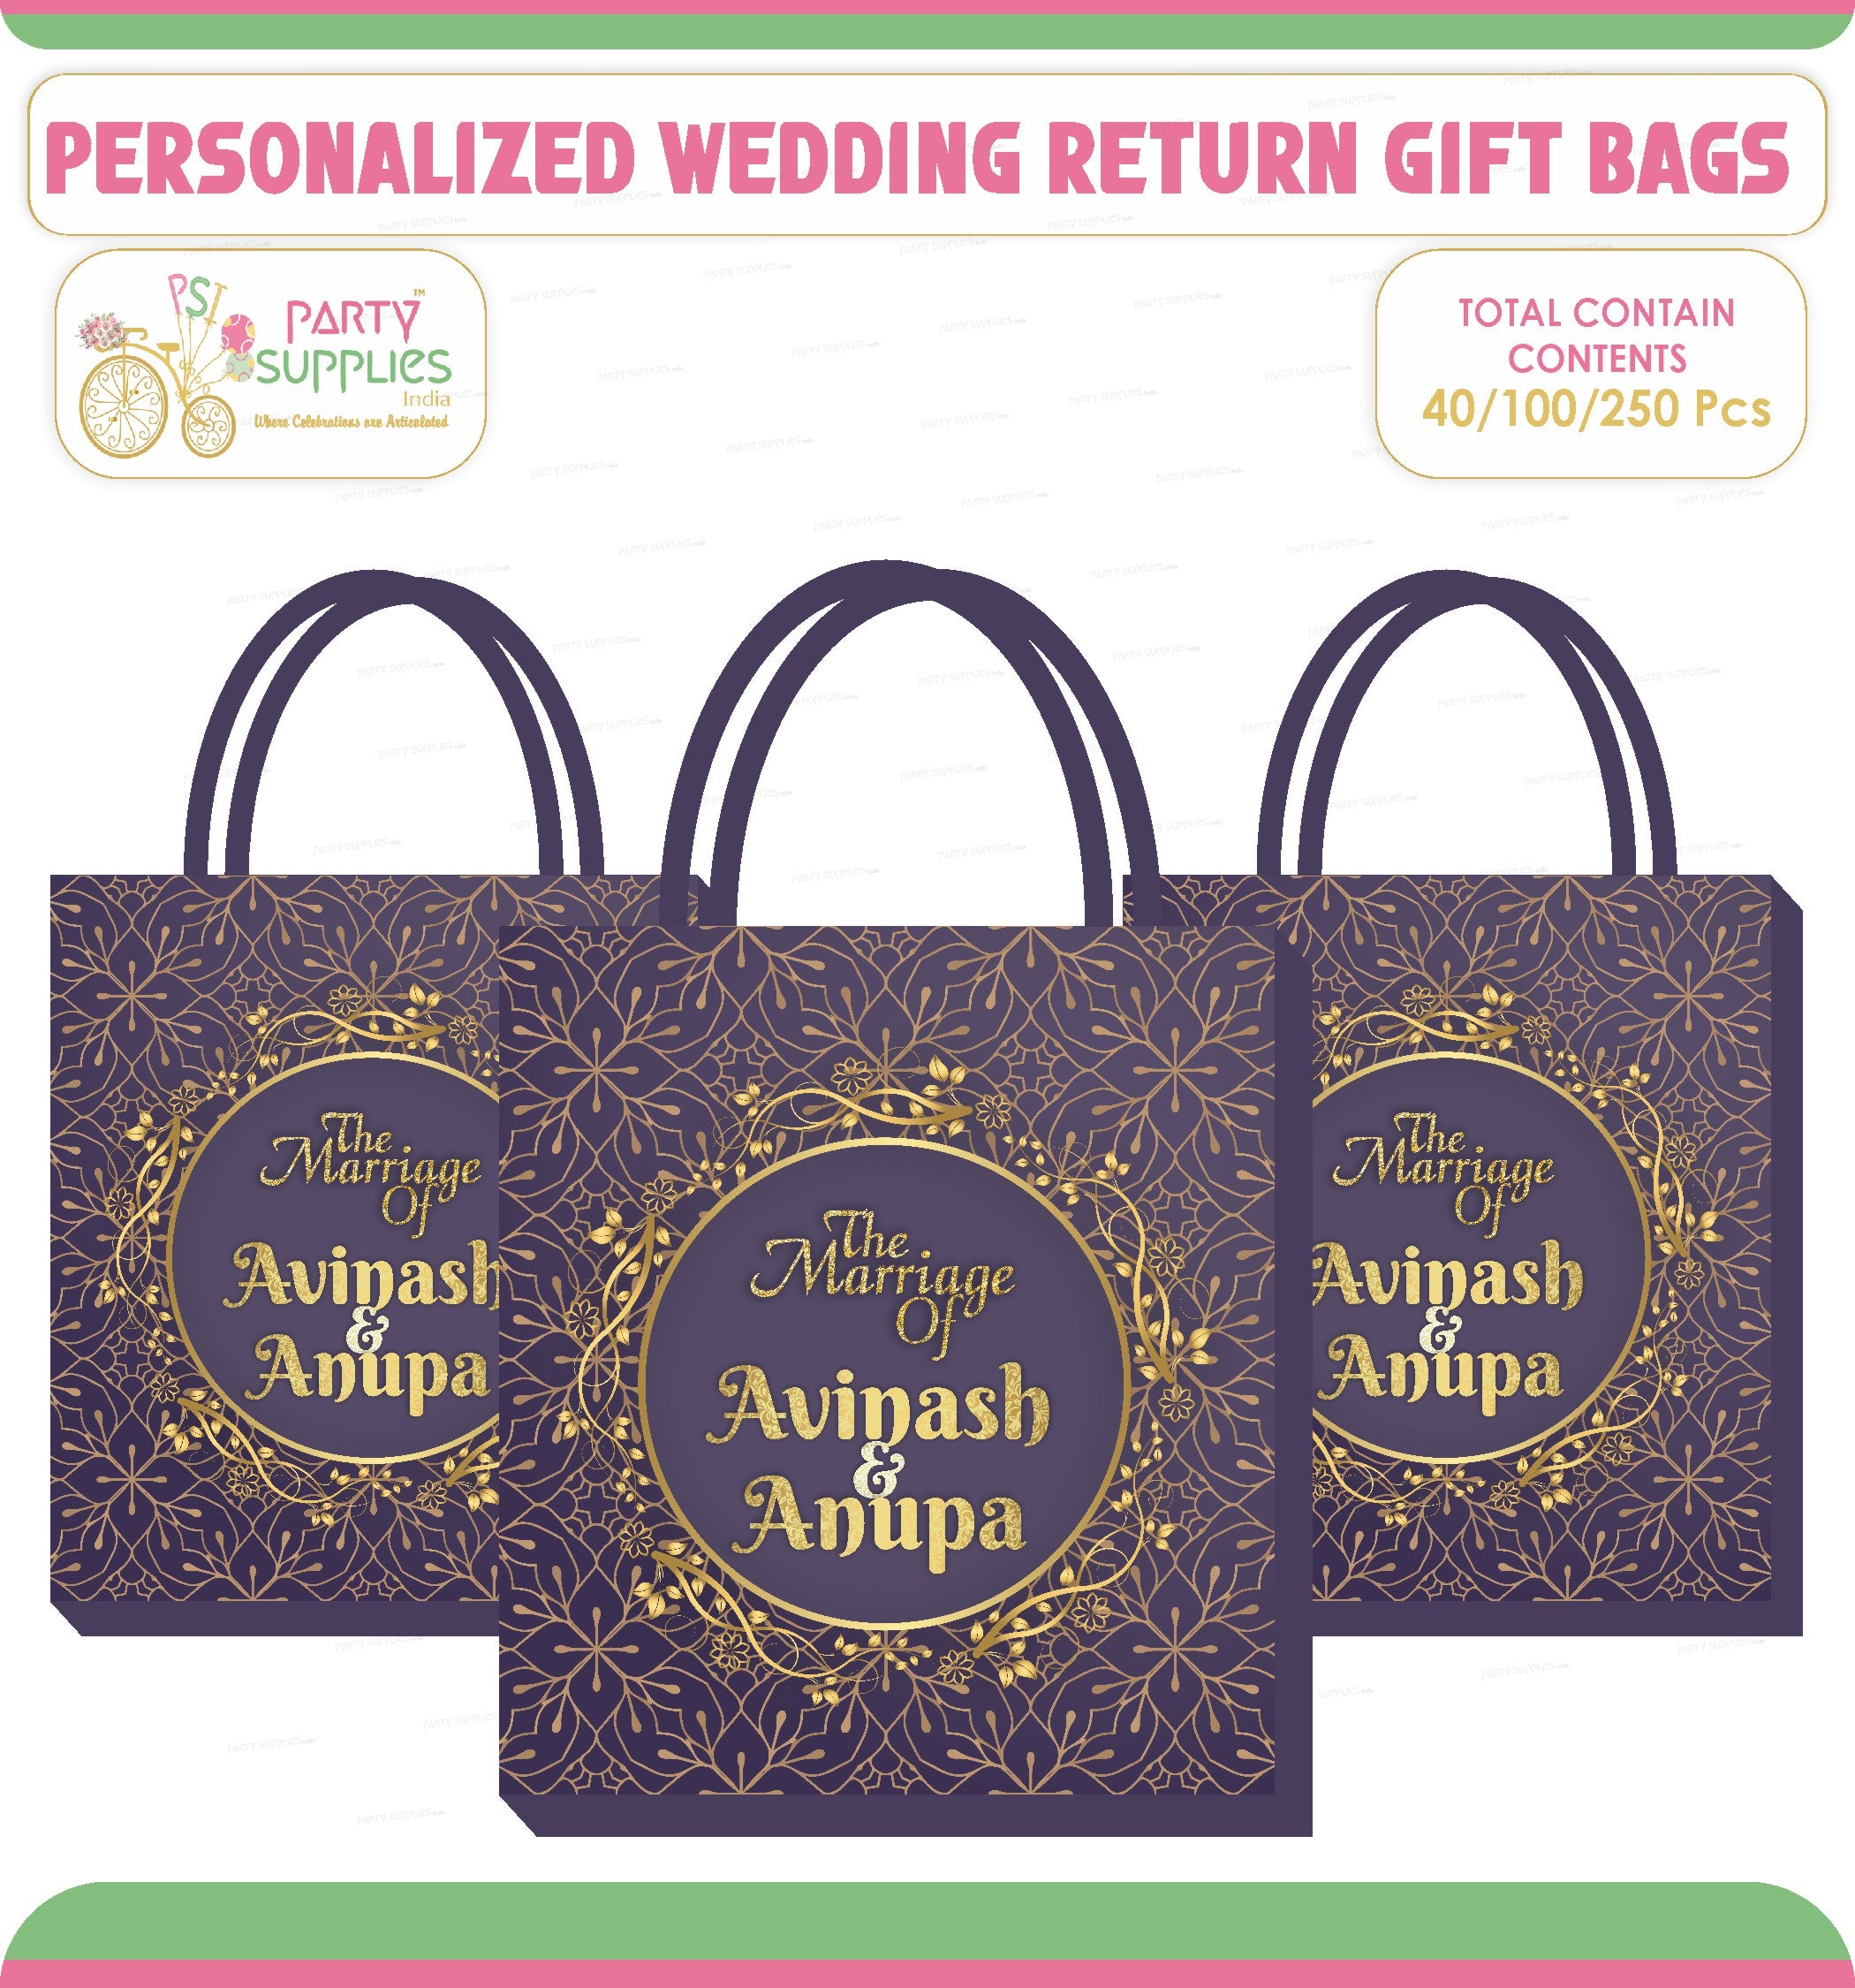 Shop Return Gift Bags Online in USA| Hindu Religious Gift Bags